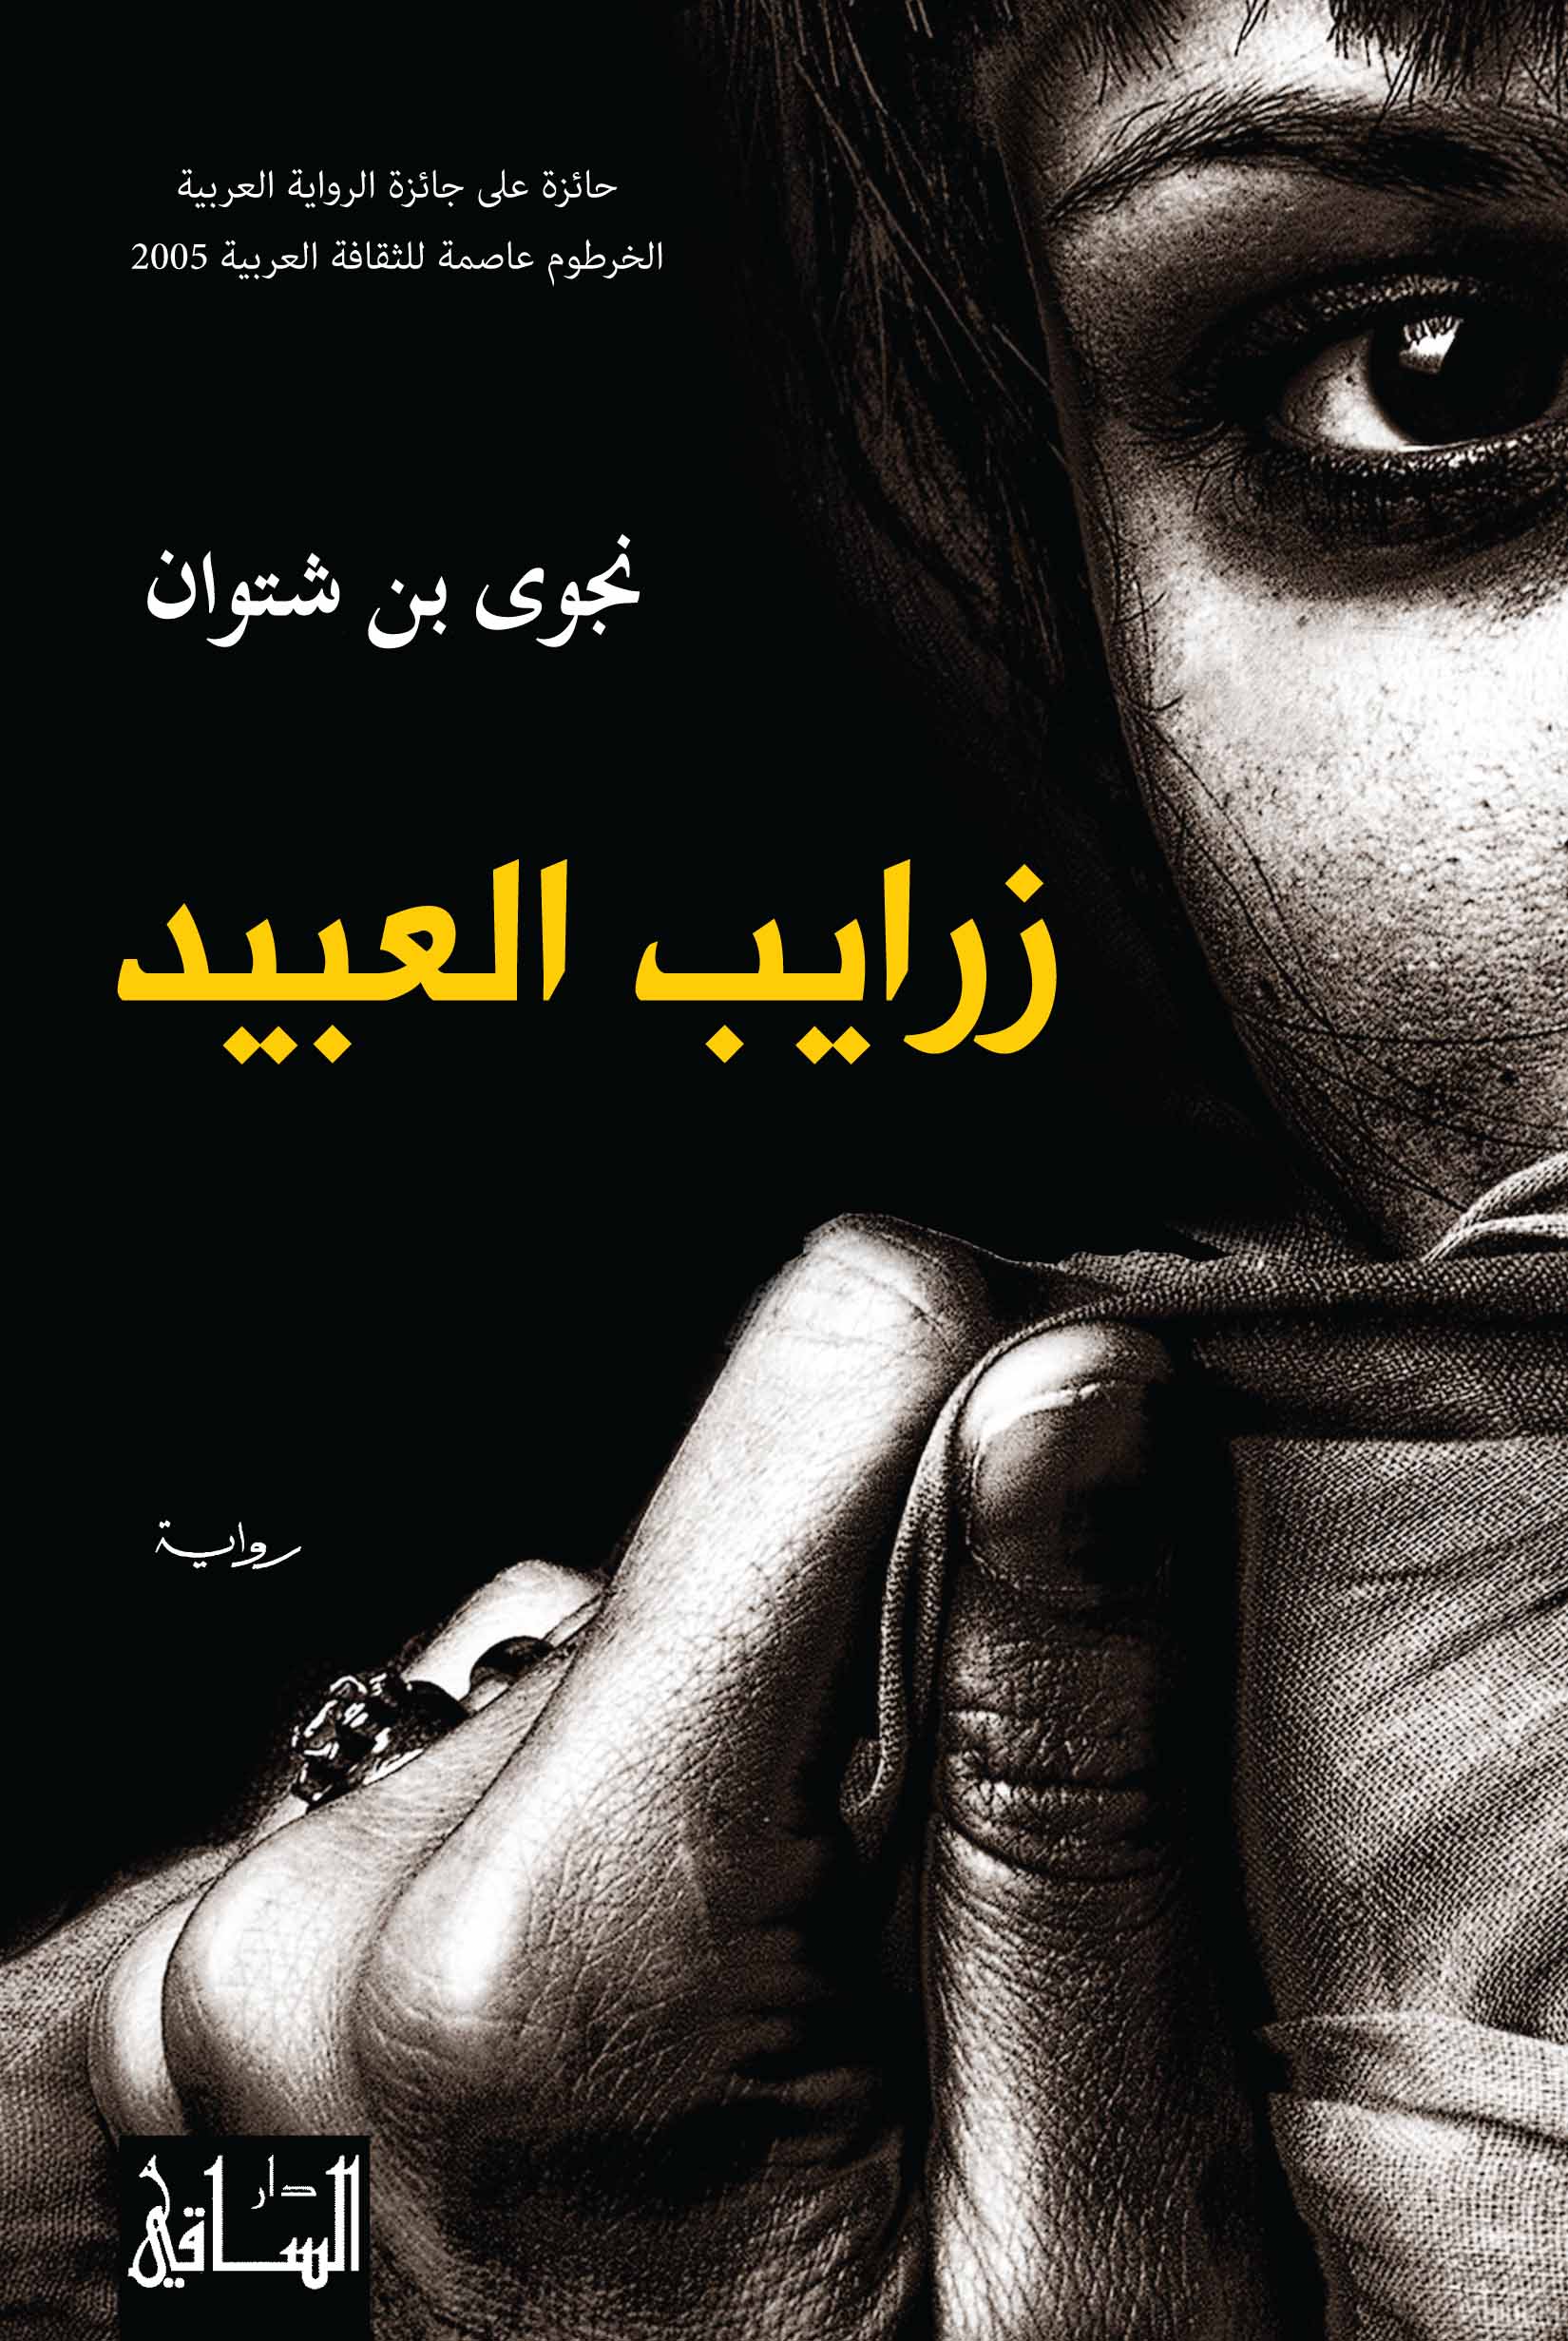 Naywa Binshatwan's "The Slave Pens" (to date only available in Arabic)